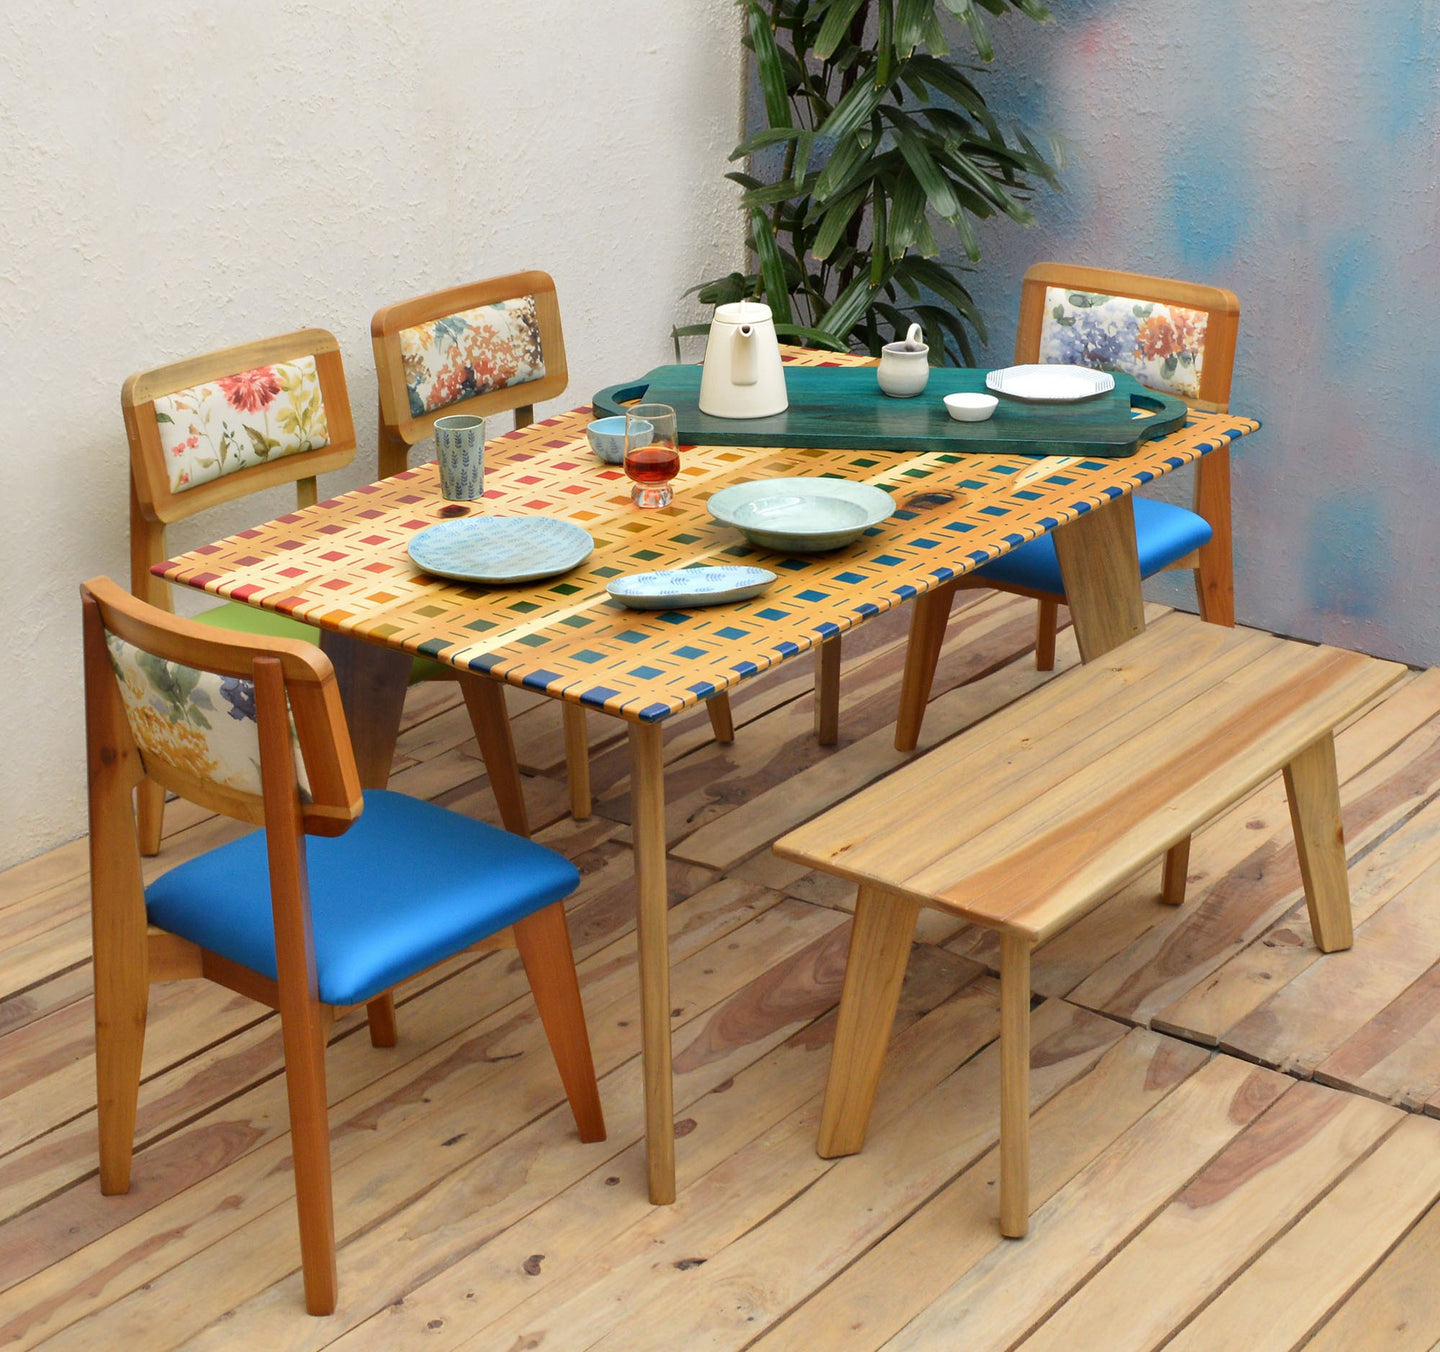 Brown Solid Wood 6 Seater Dining Set with Handprinted Madras Checks Serigraph on the Table Top